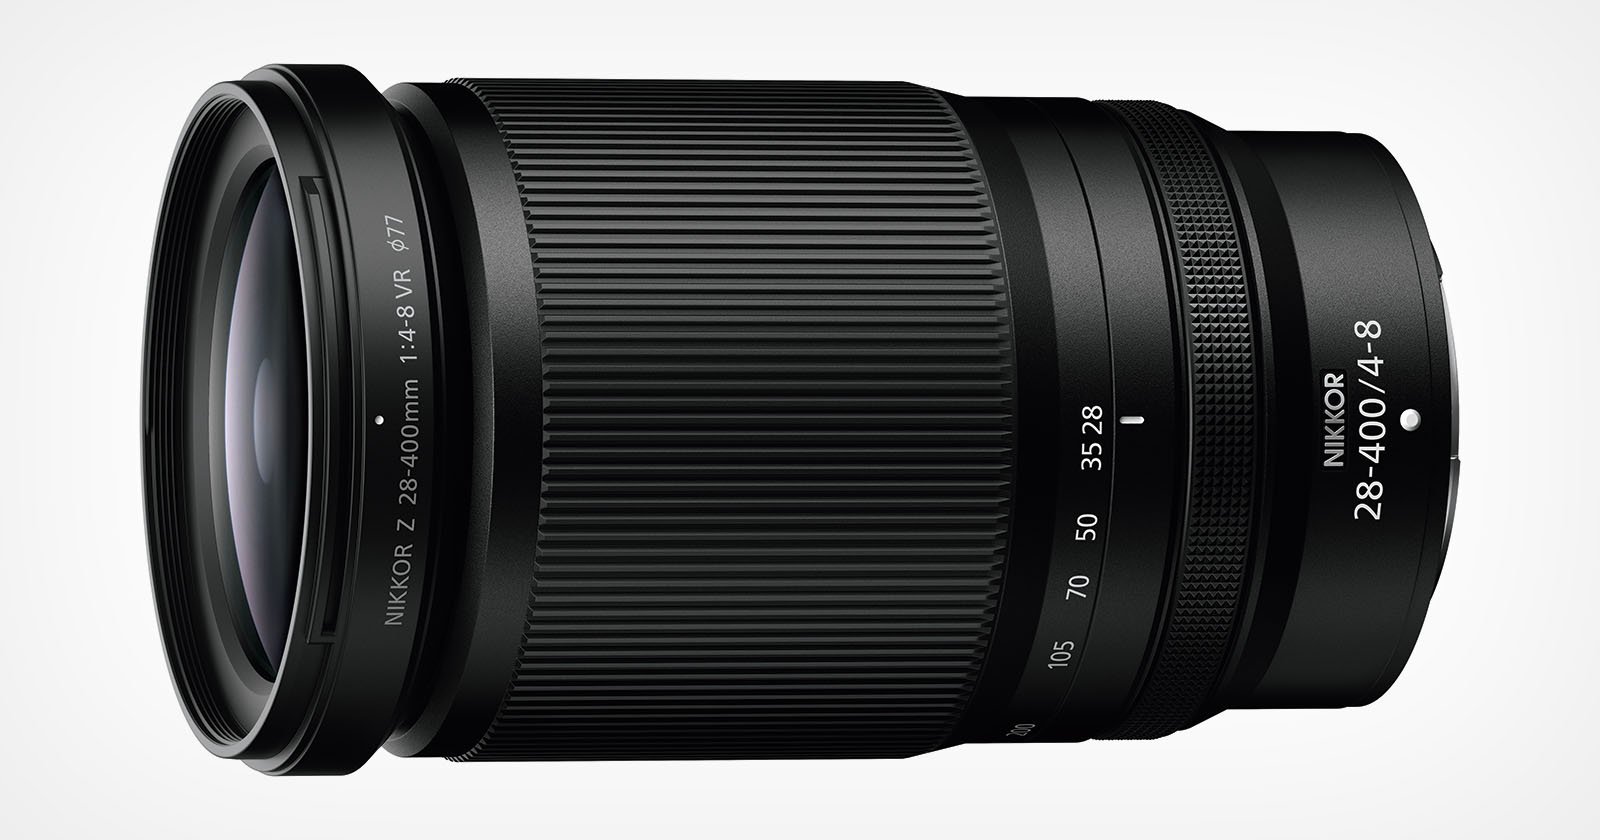 The new Nikon Z 28-400mm f/4-8 VR aims to be the ultimate travel lens